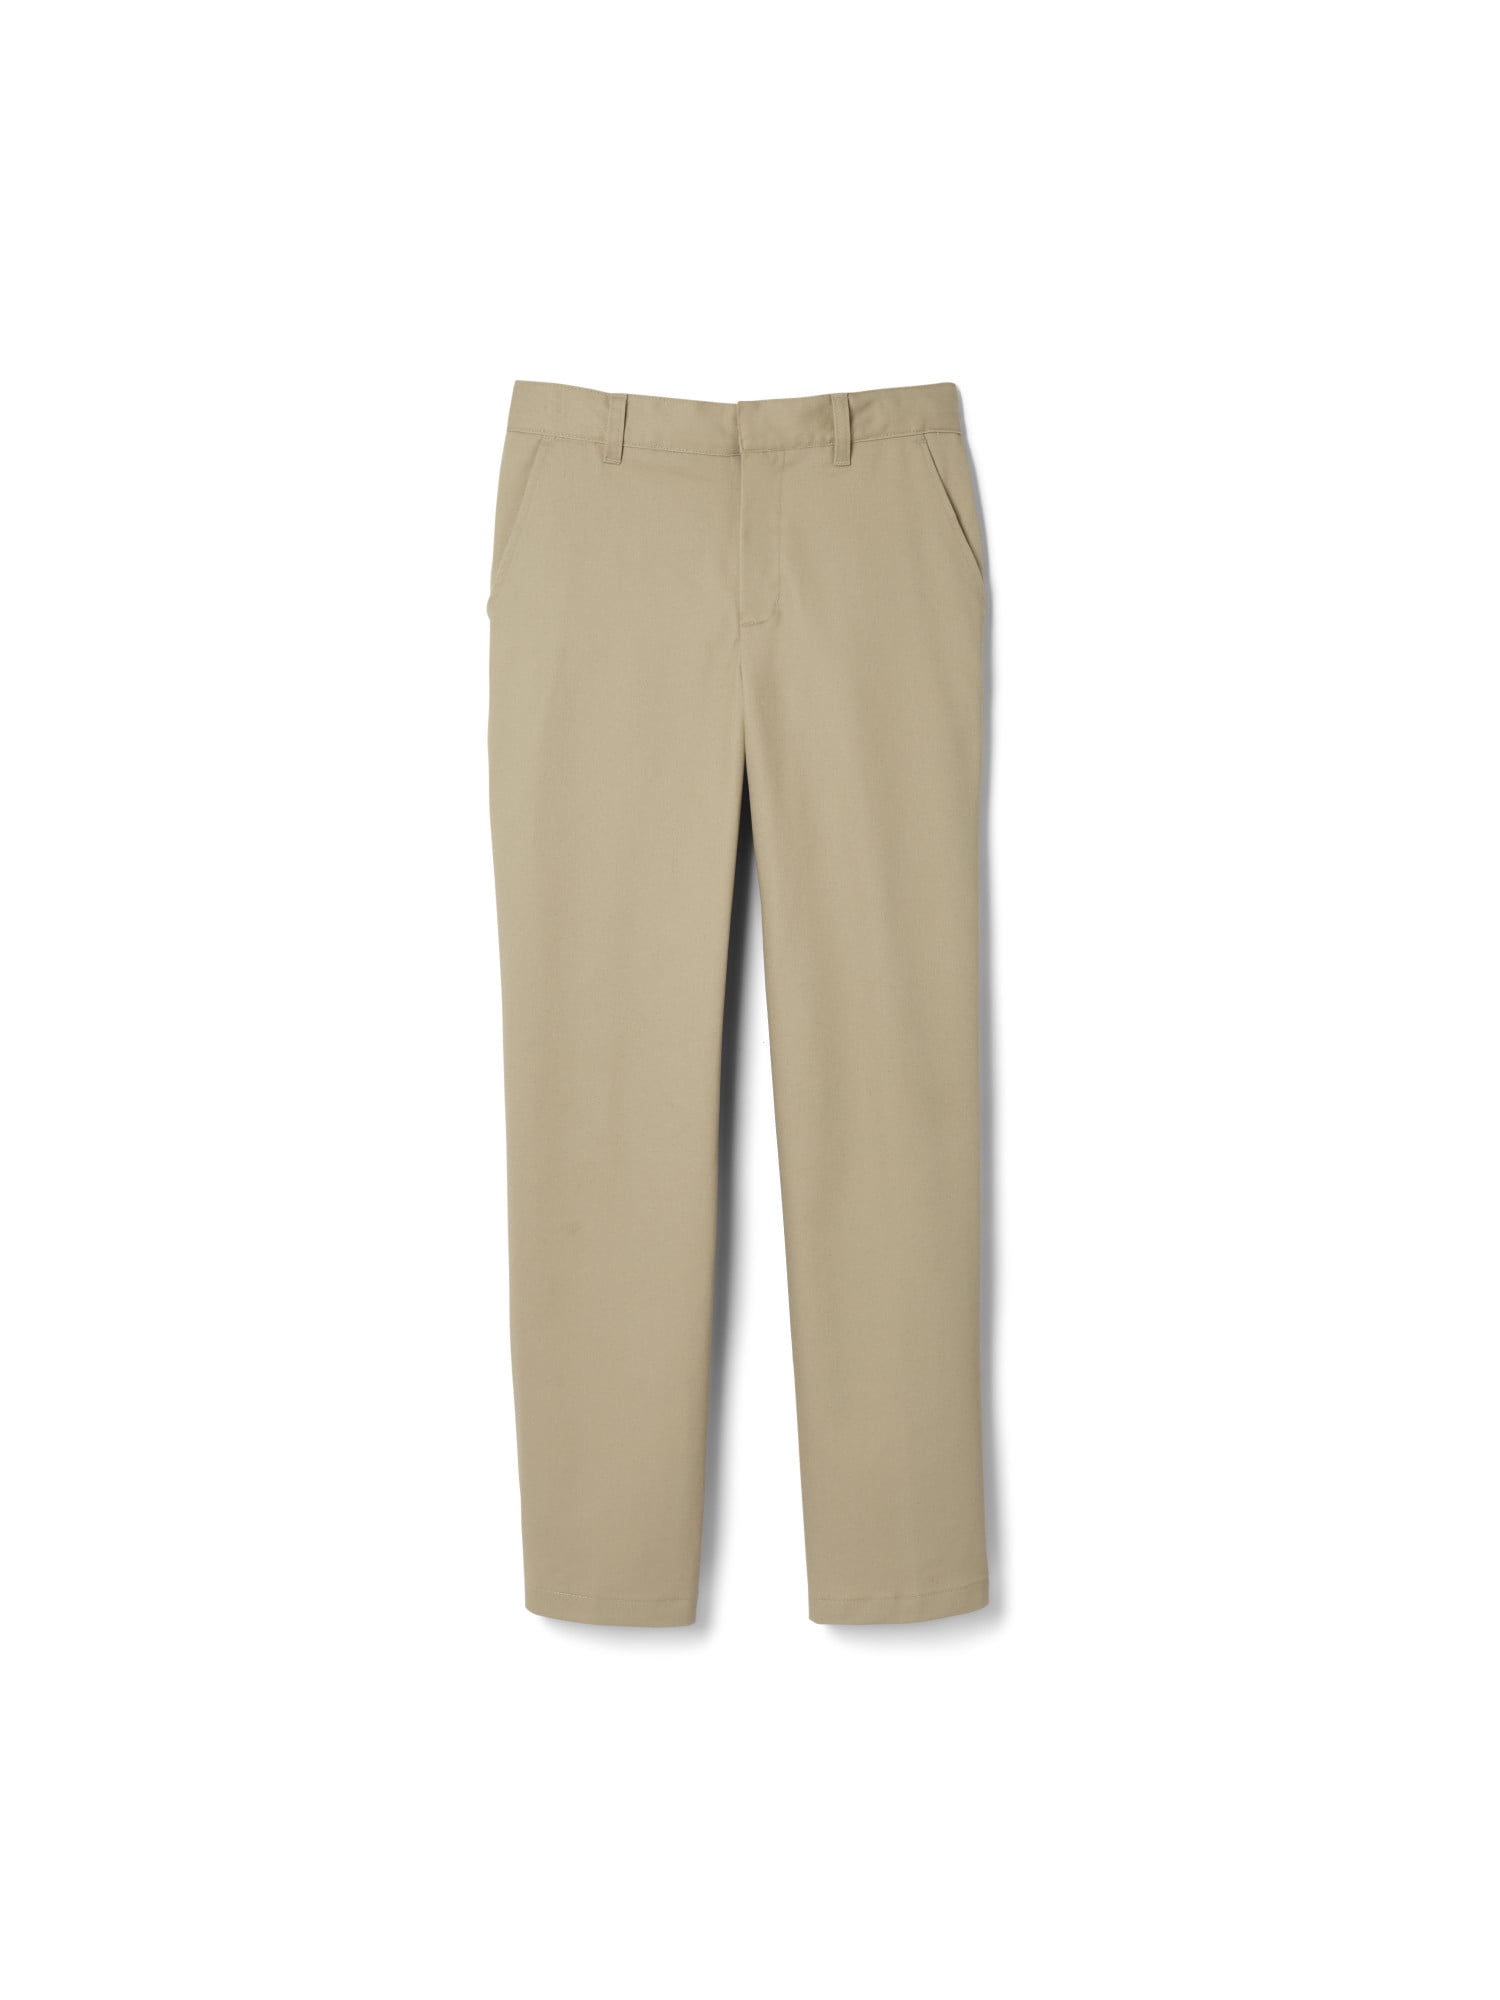 Khaki 16 French Toast Big Boys Wrinkle No More Relaxed Fit Pants 